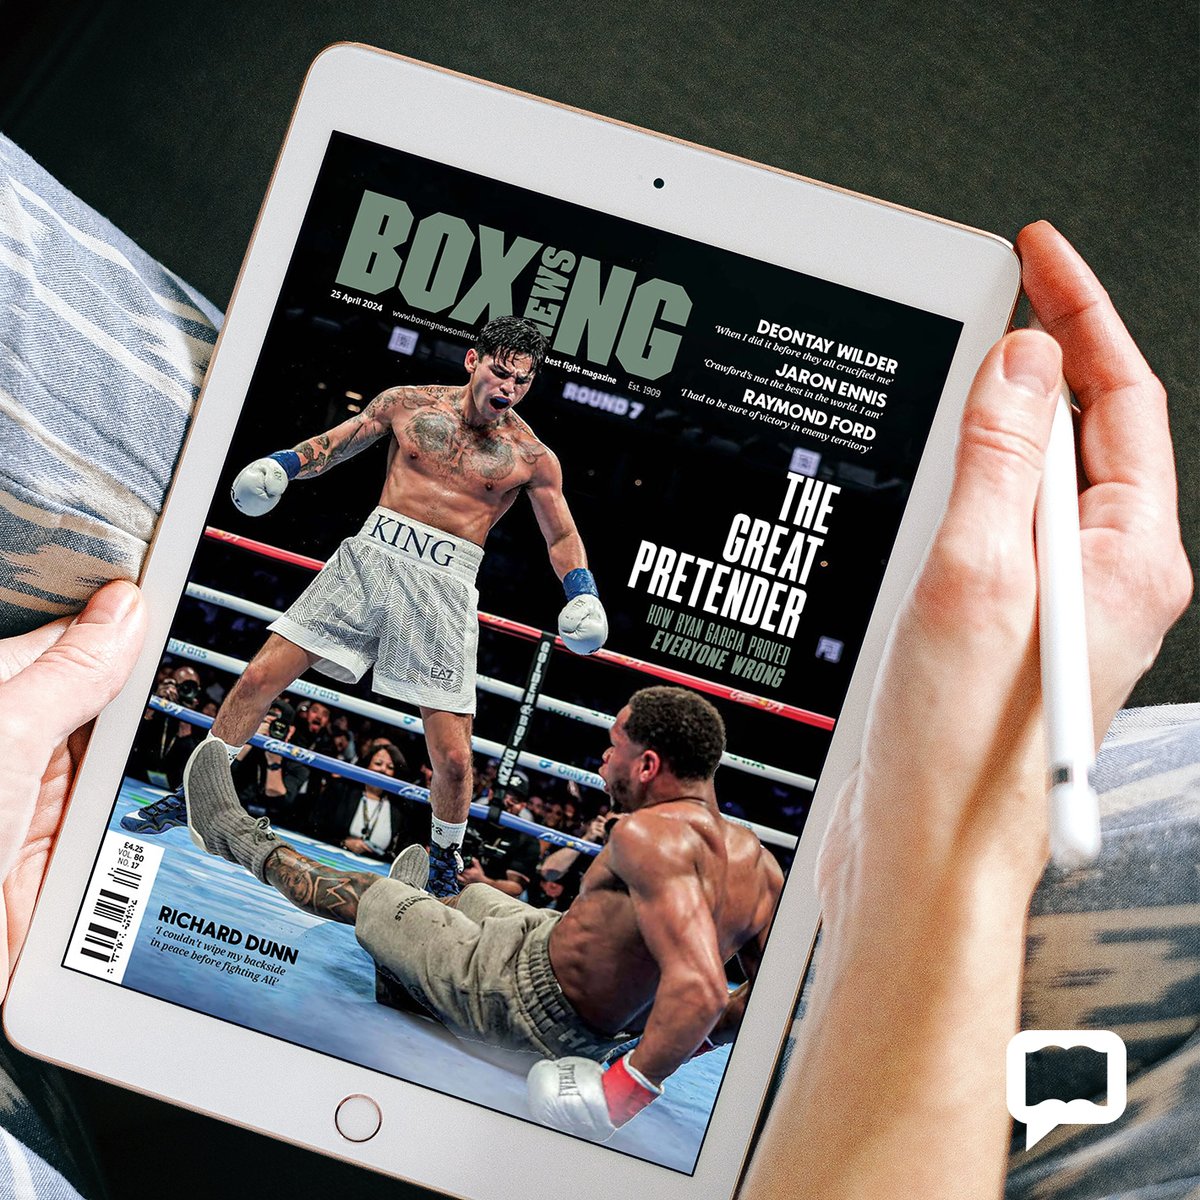 Discover the latest issue of @BoxingNewsED and more eMagazines - available on #BorrowBox now!